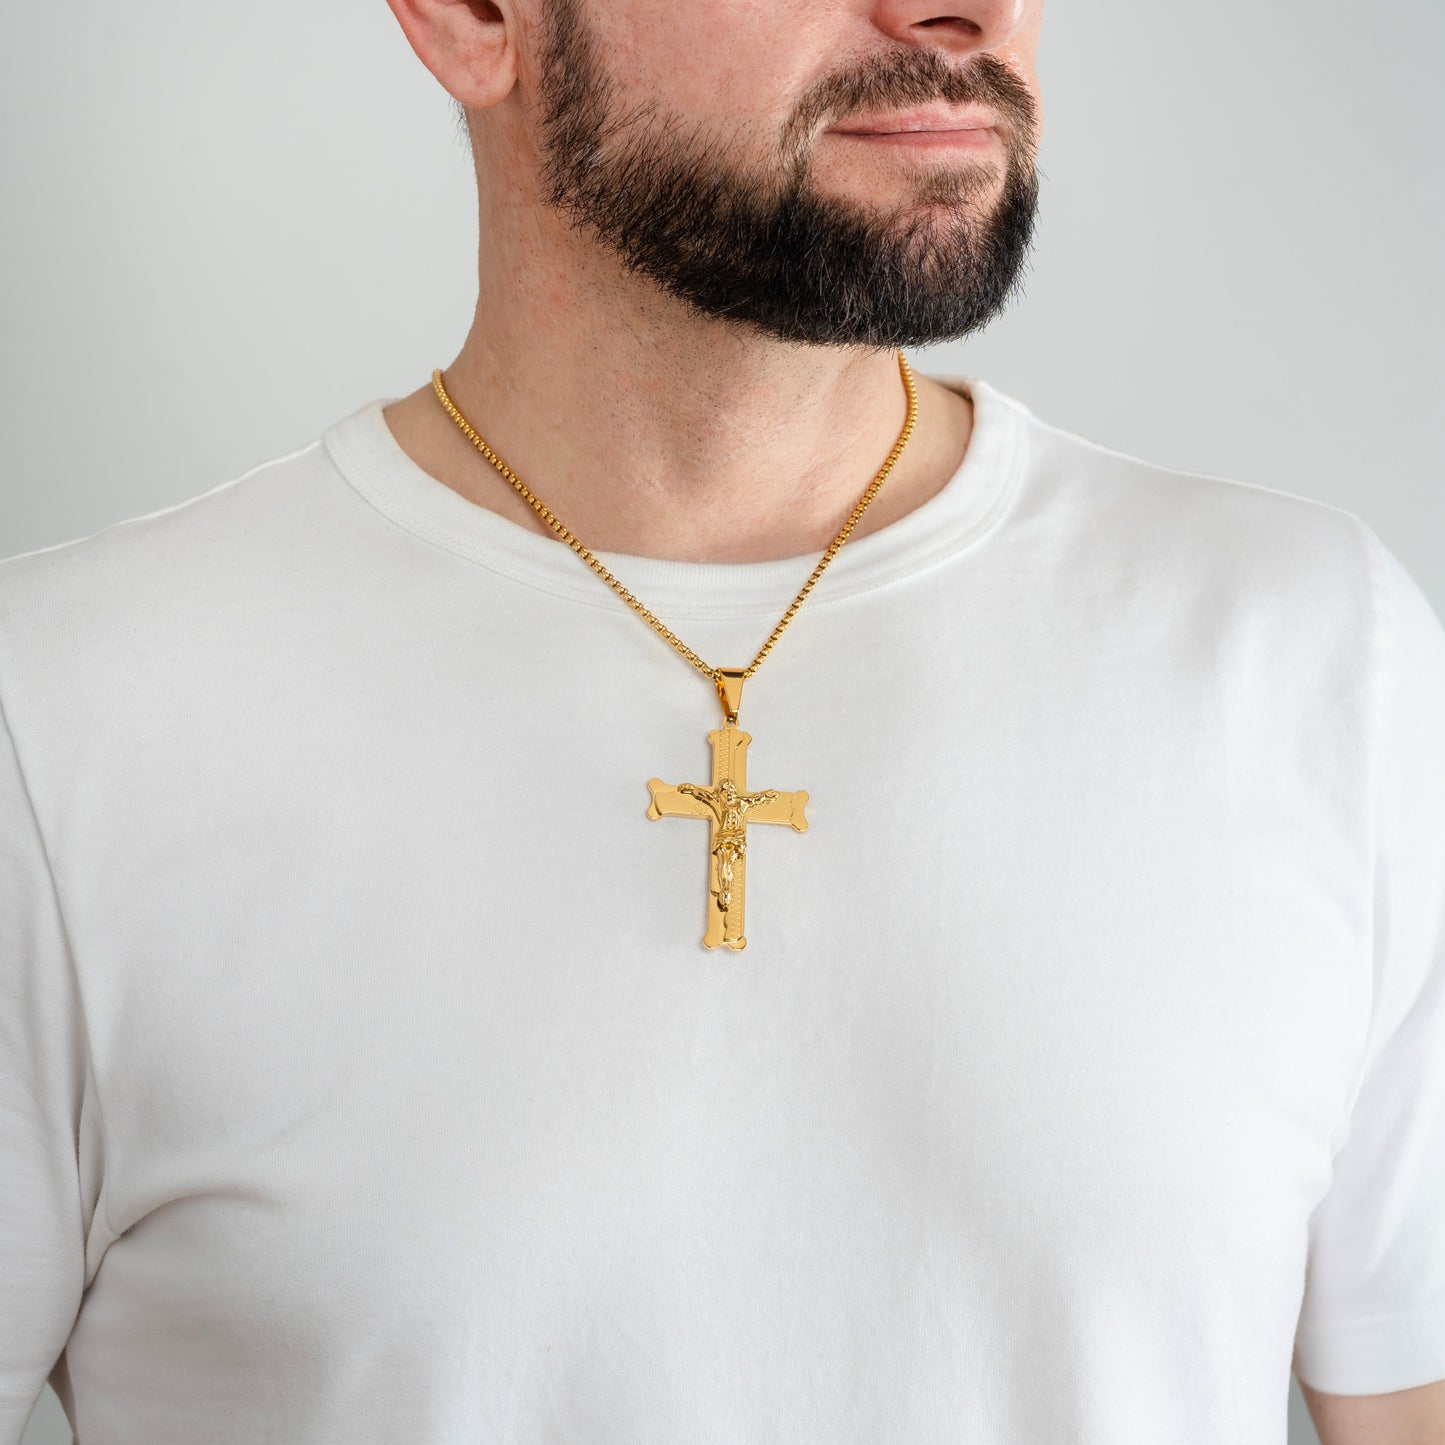 A male model in a white t-shirt wearing a Bliss Crucifix Cross Gold Pendant with a 3mm Gold Rope chain 22 inches.